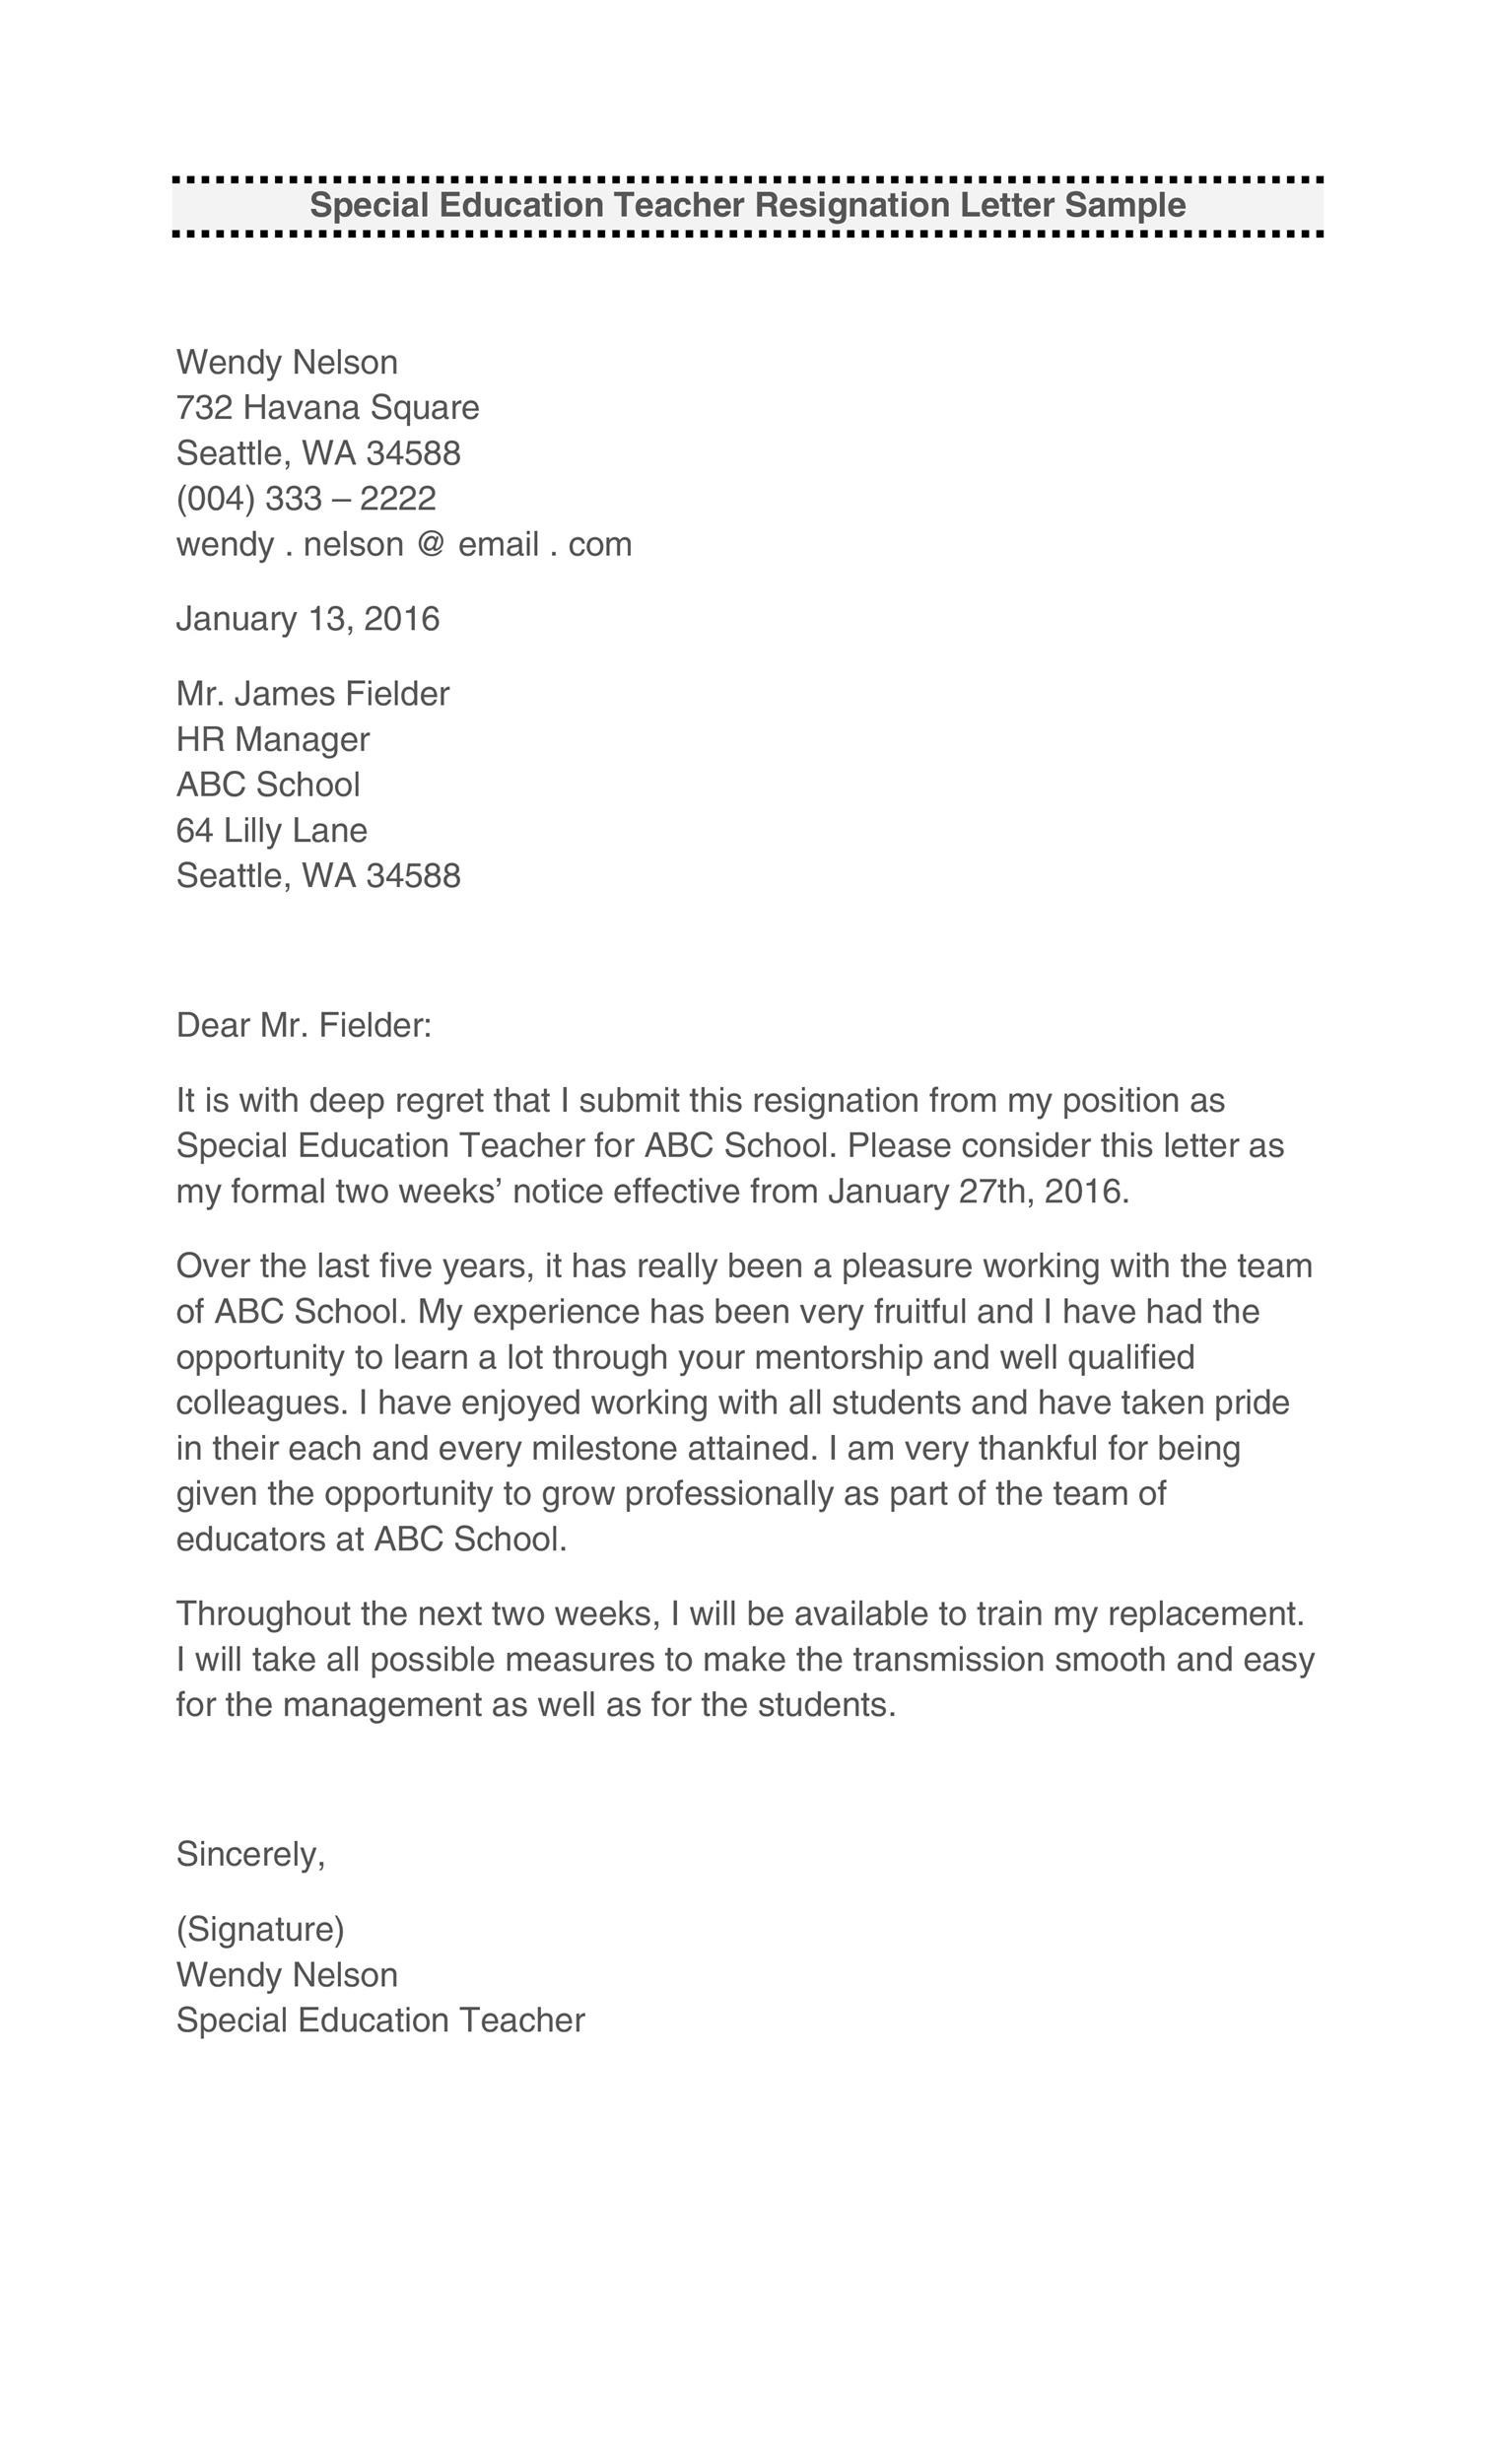 Email Resignation Letter Format from templatelab.com